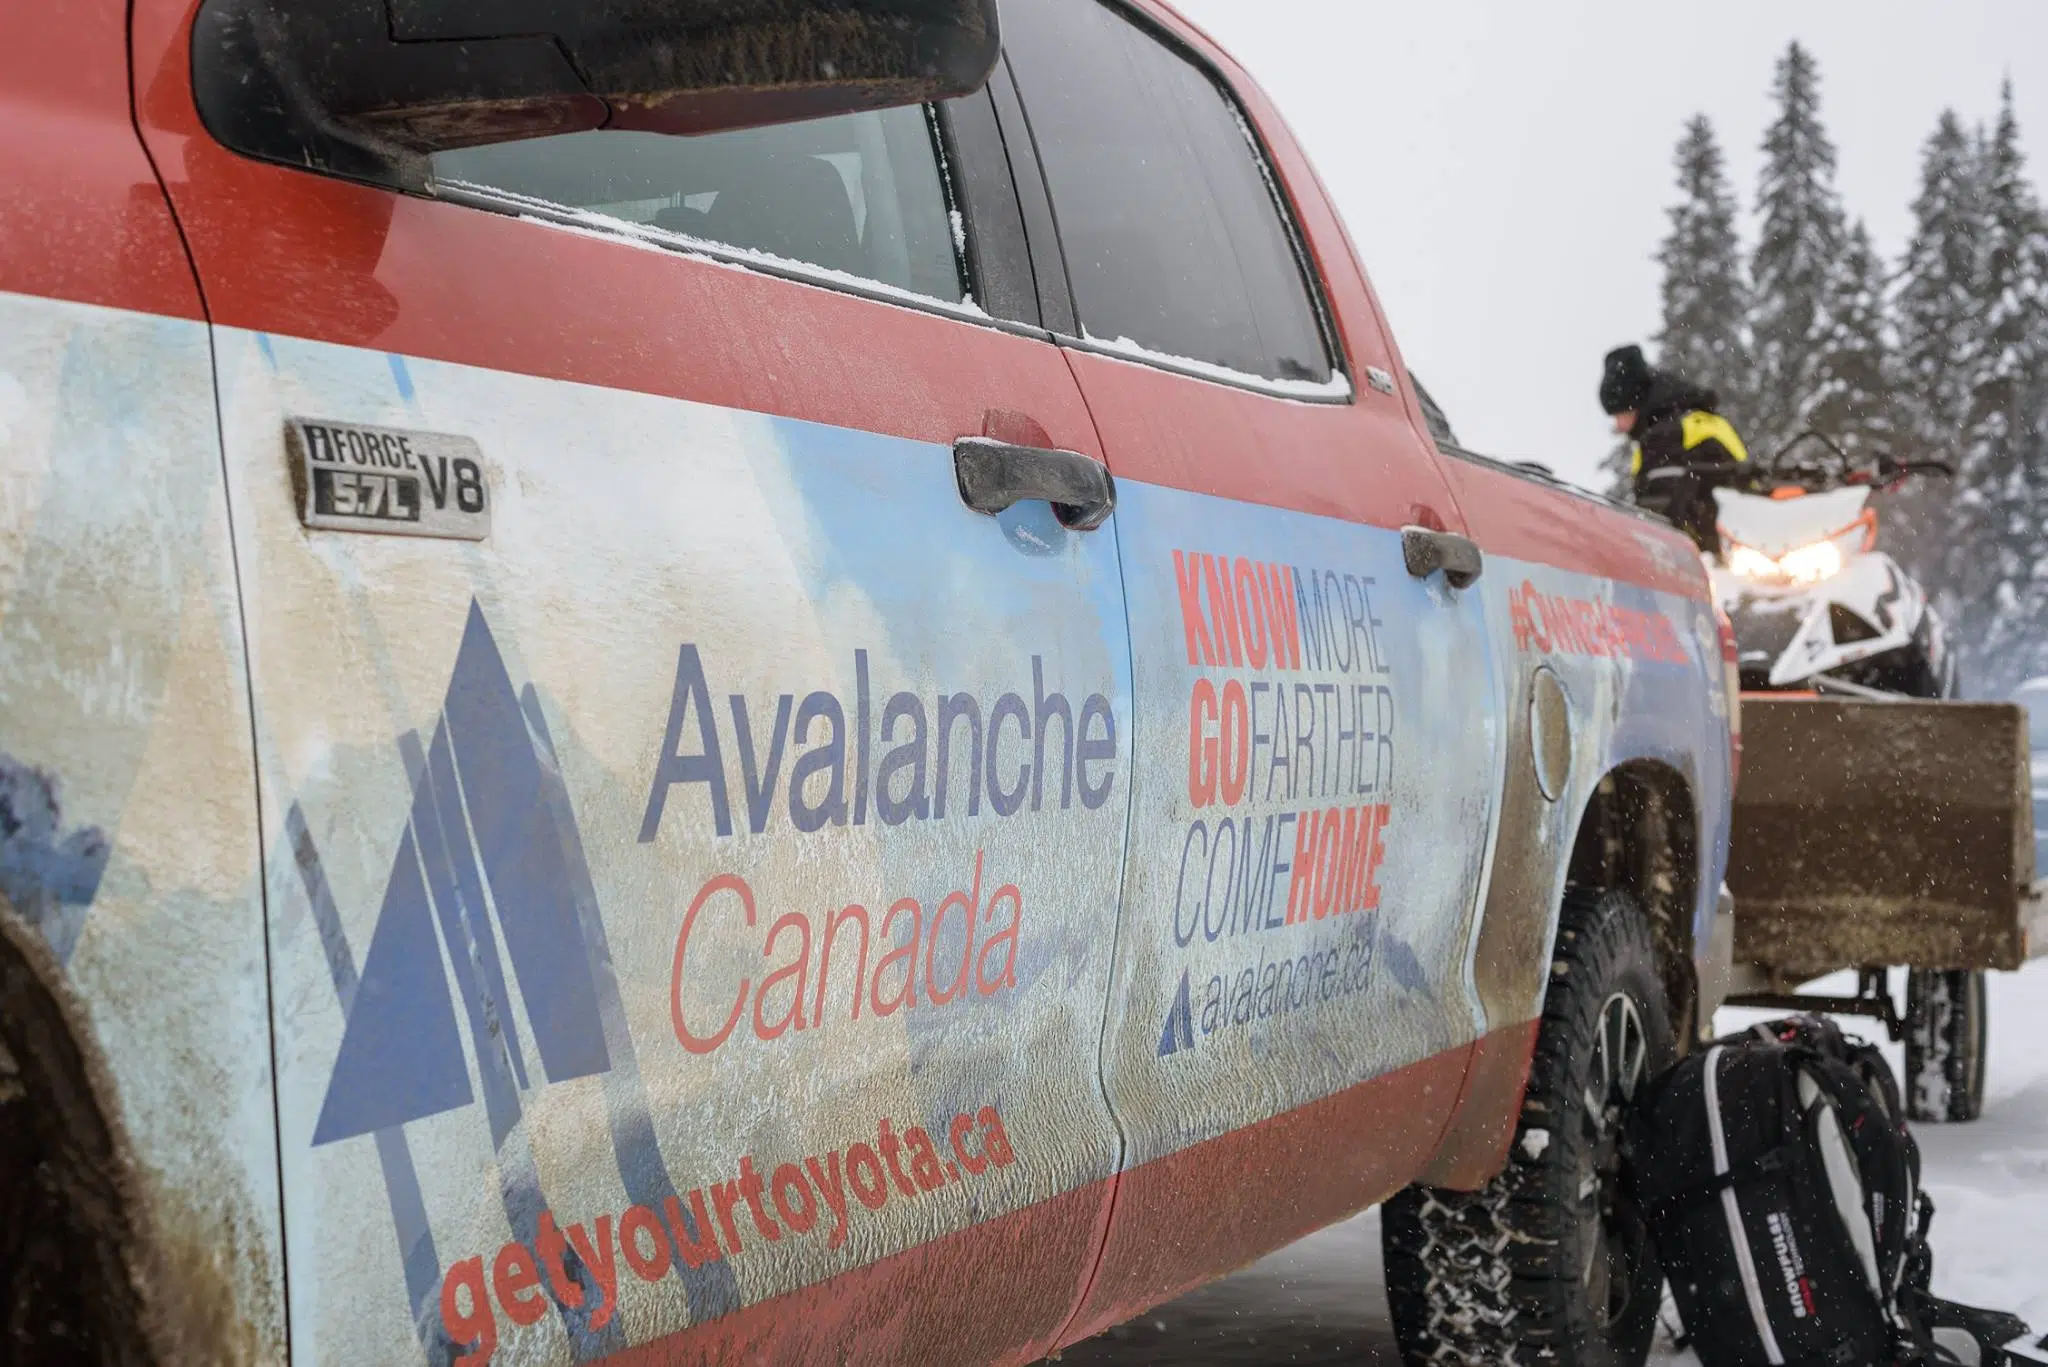 Avalanche Canada asking back country enthusiasts to err on the side of caution this weekend